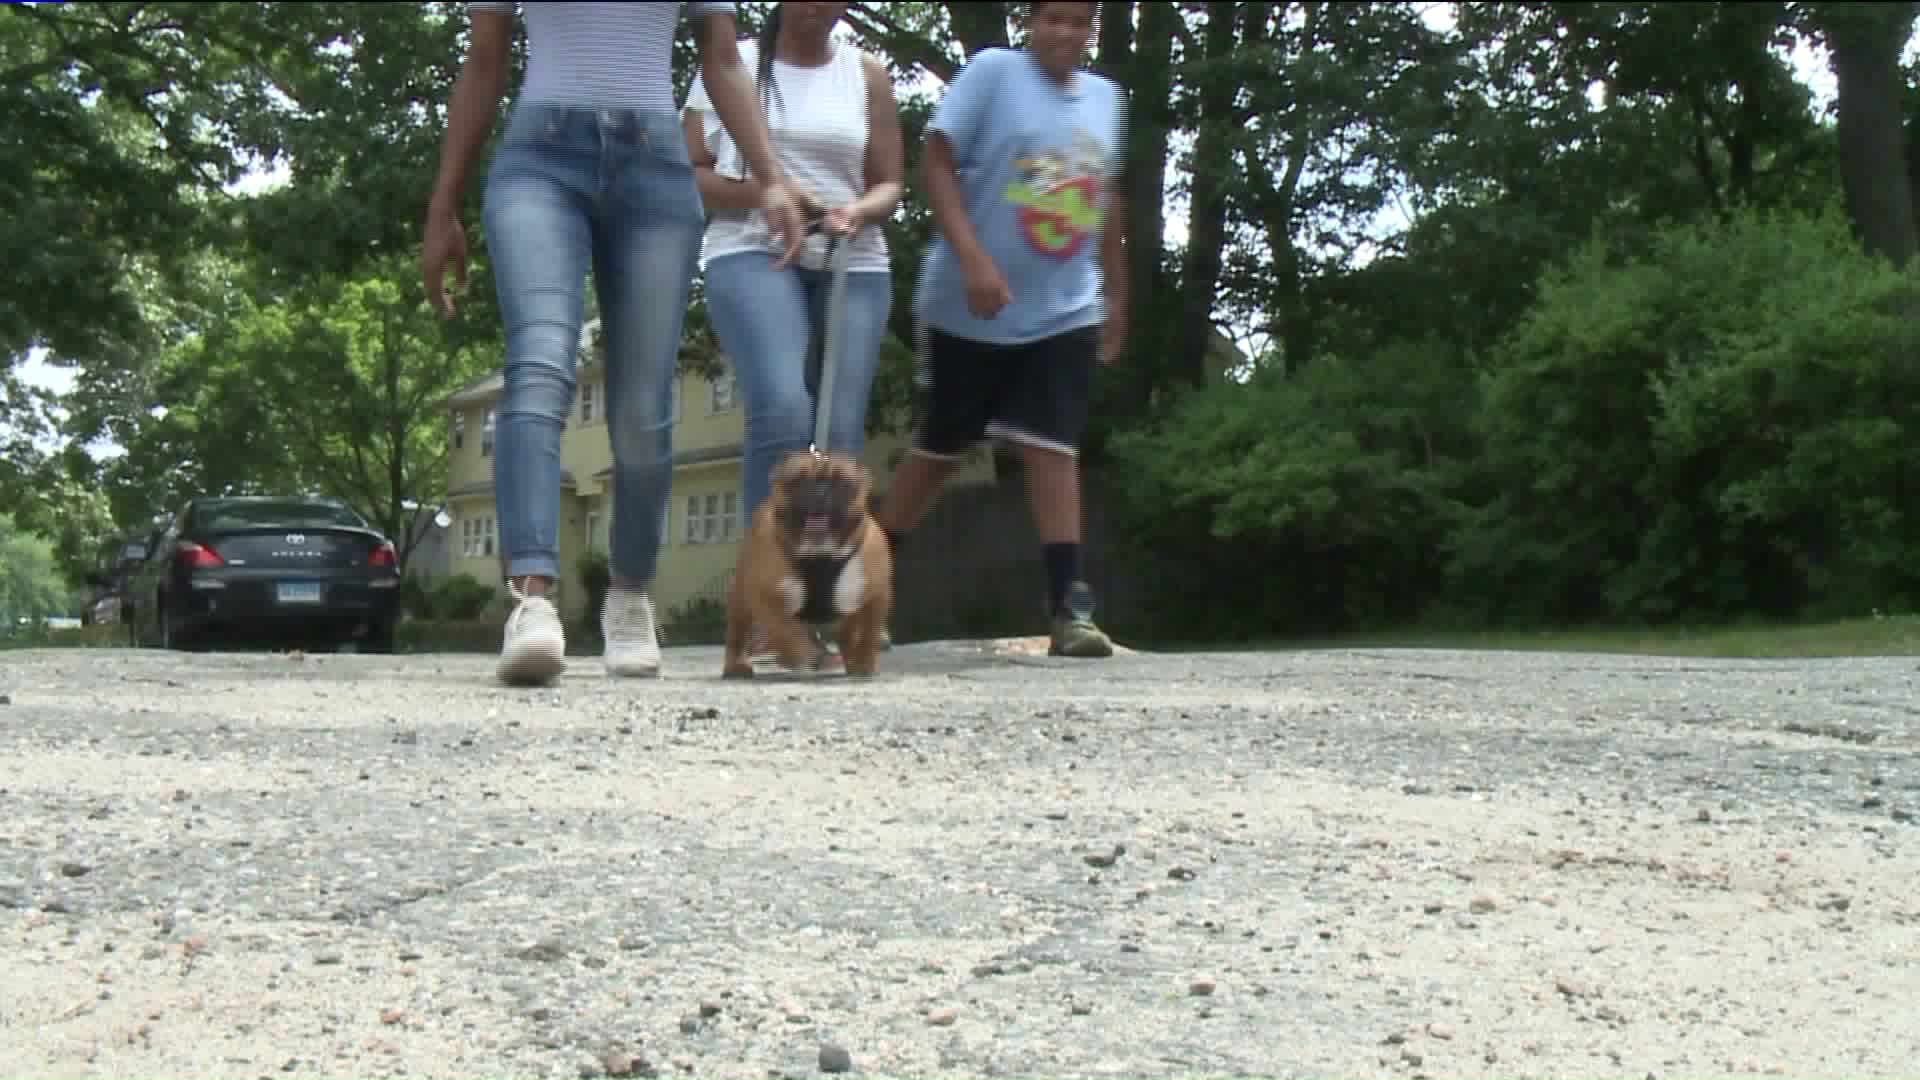 Waterbury family claims a verbal attack on them while walking their dog was racially motivated